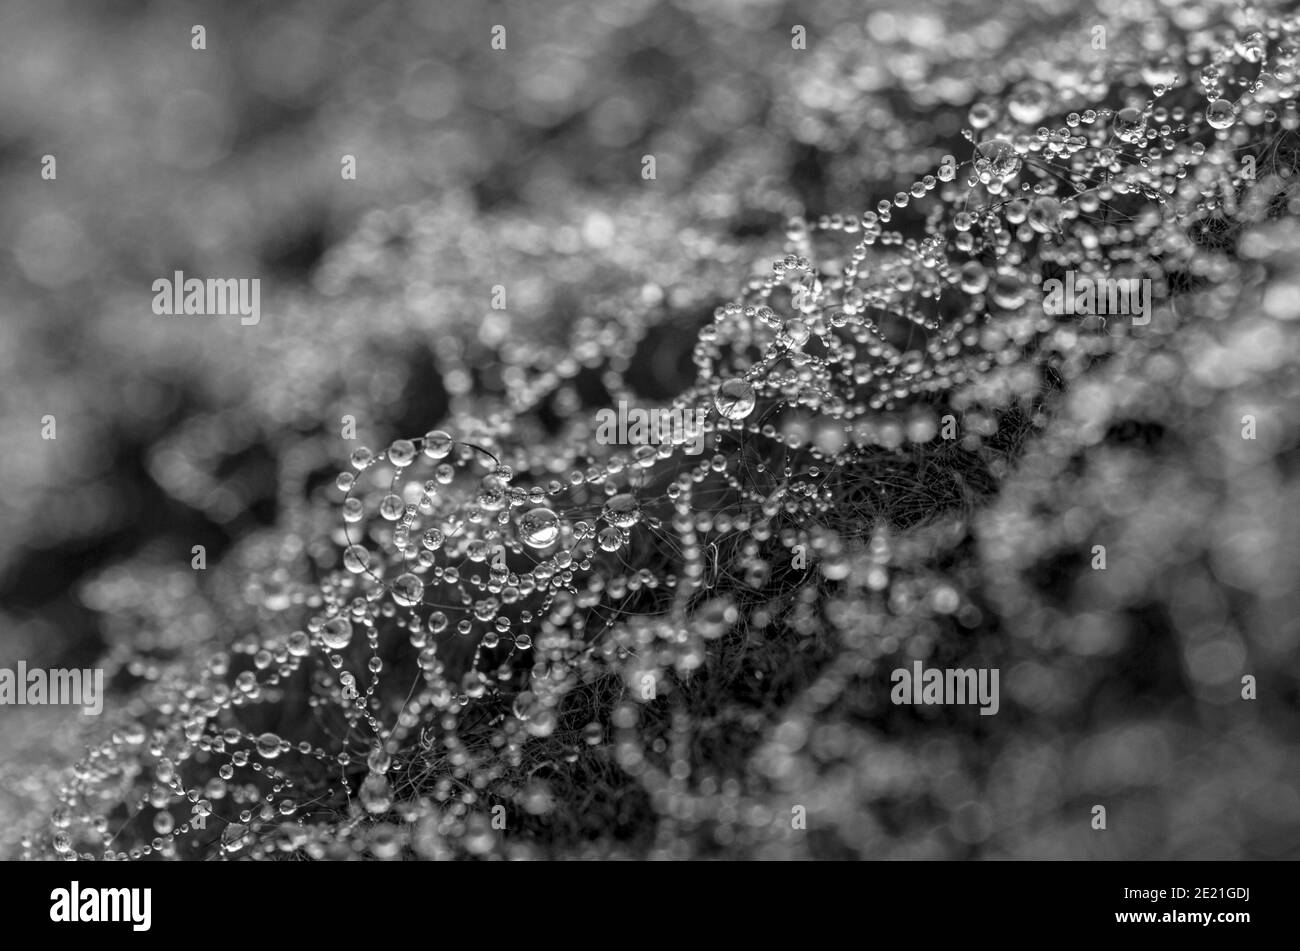 morning dew on woolly jumper Stock Photo